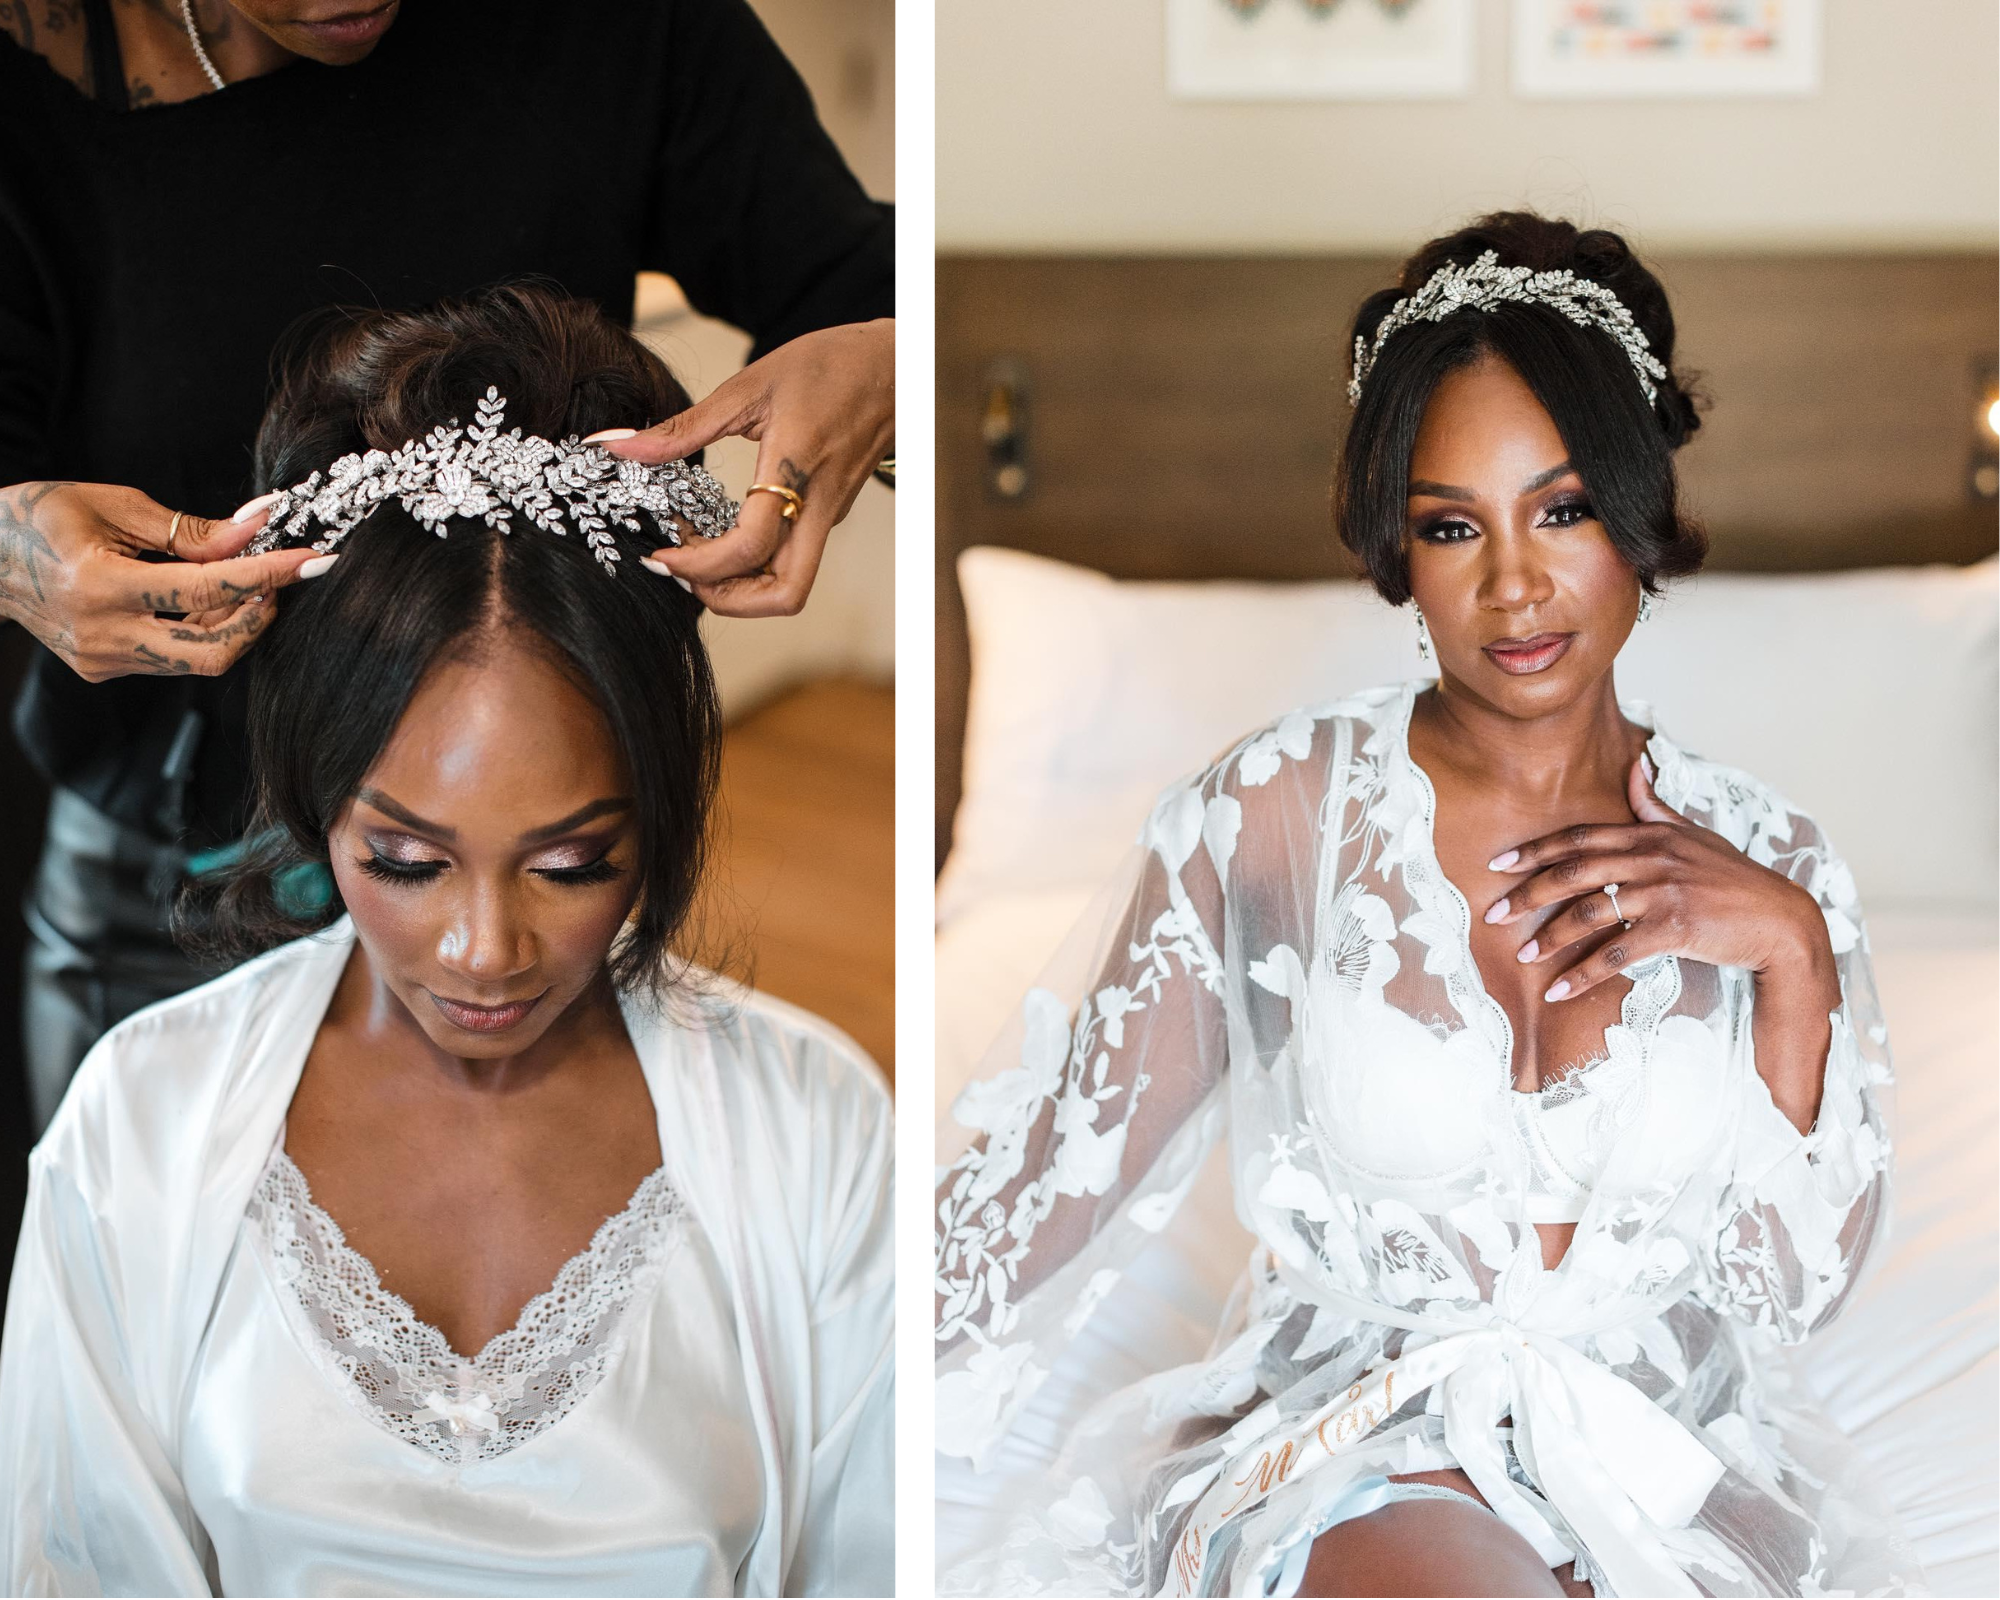 Stunning Charleen getting ready for her big day. She's wearing a lacy robe and sparkling headpiece covered in Swarovski crystals. 